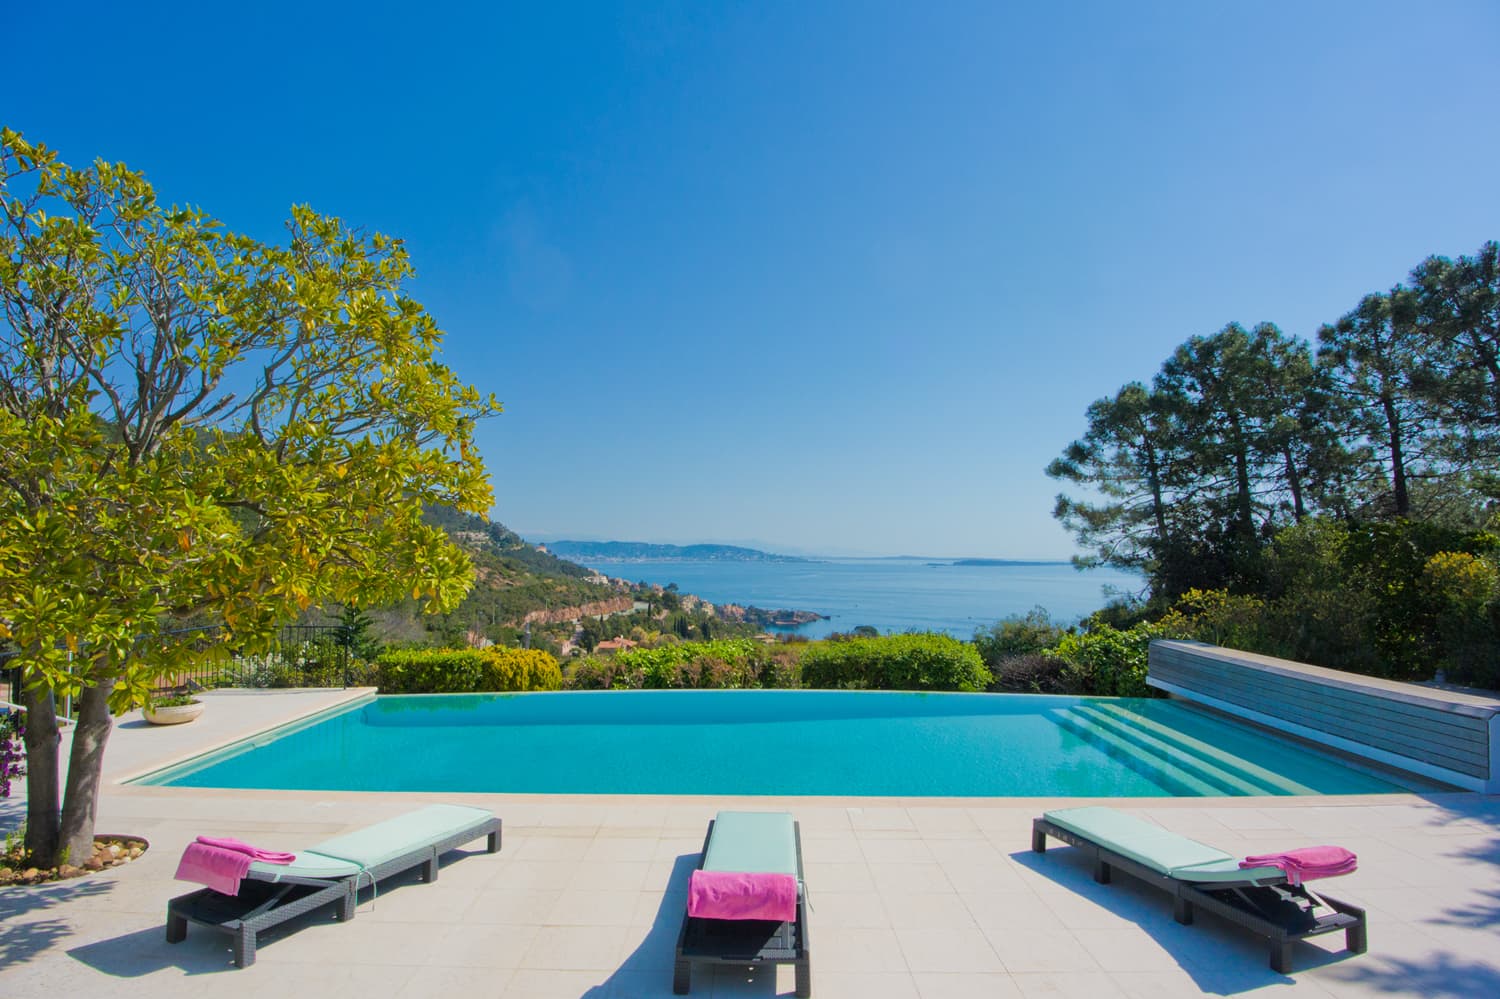 Holiday villa on the French Riviera with private pool and fabulous views | Villa Saint-Honorat